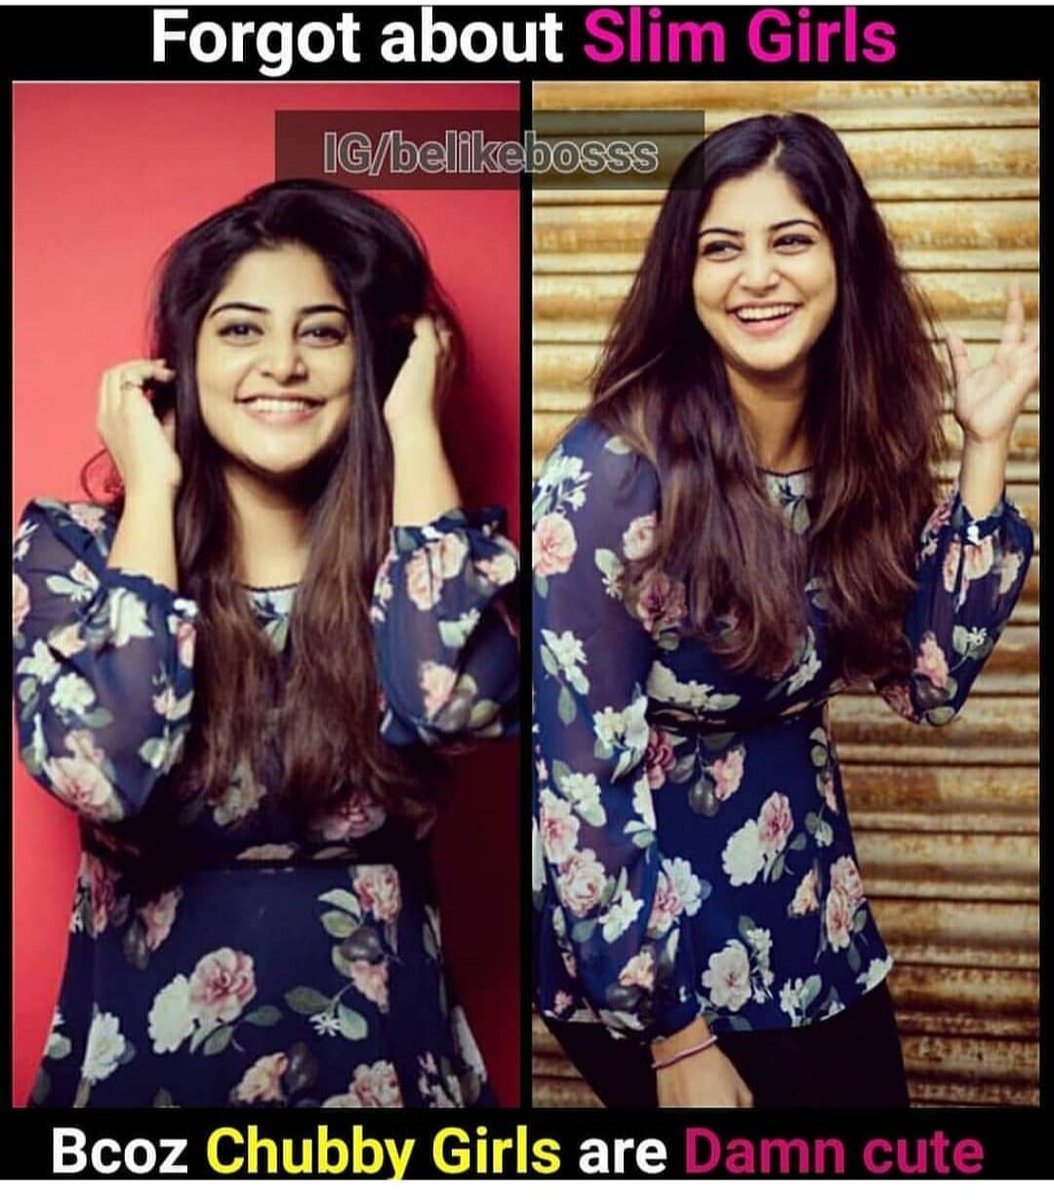 Now agree chubby grls are damn cute 😍😍 that smile 🤤@mohanmanjima